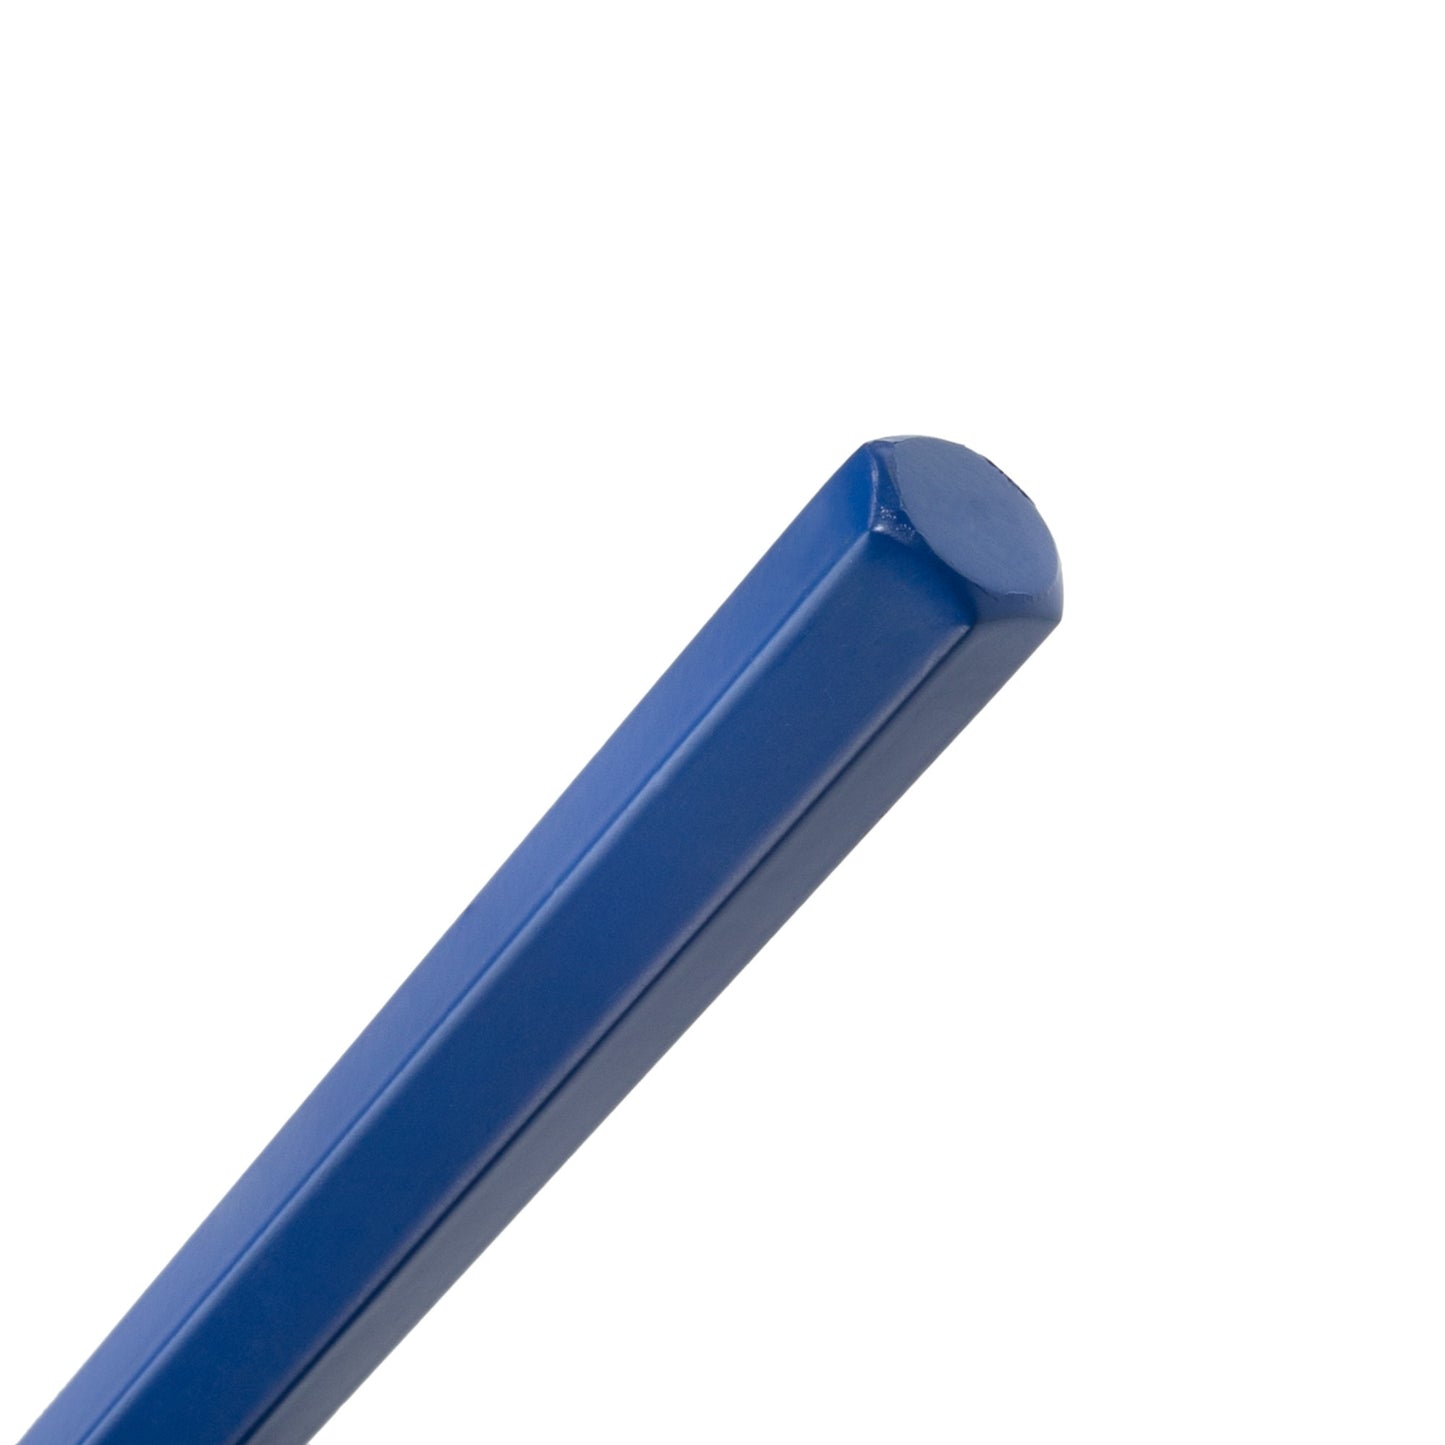 1-Inch Wide Hex Shaft Cold Chisel